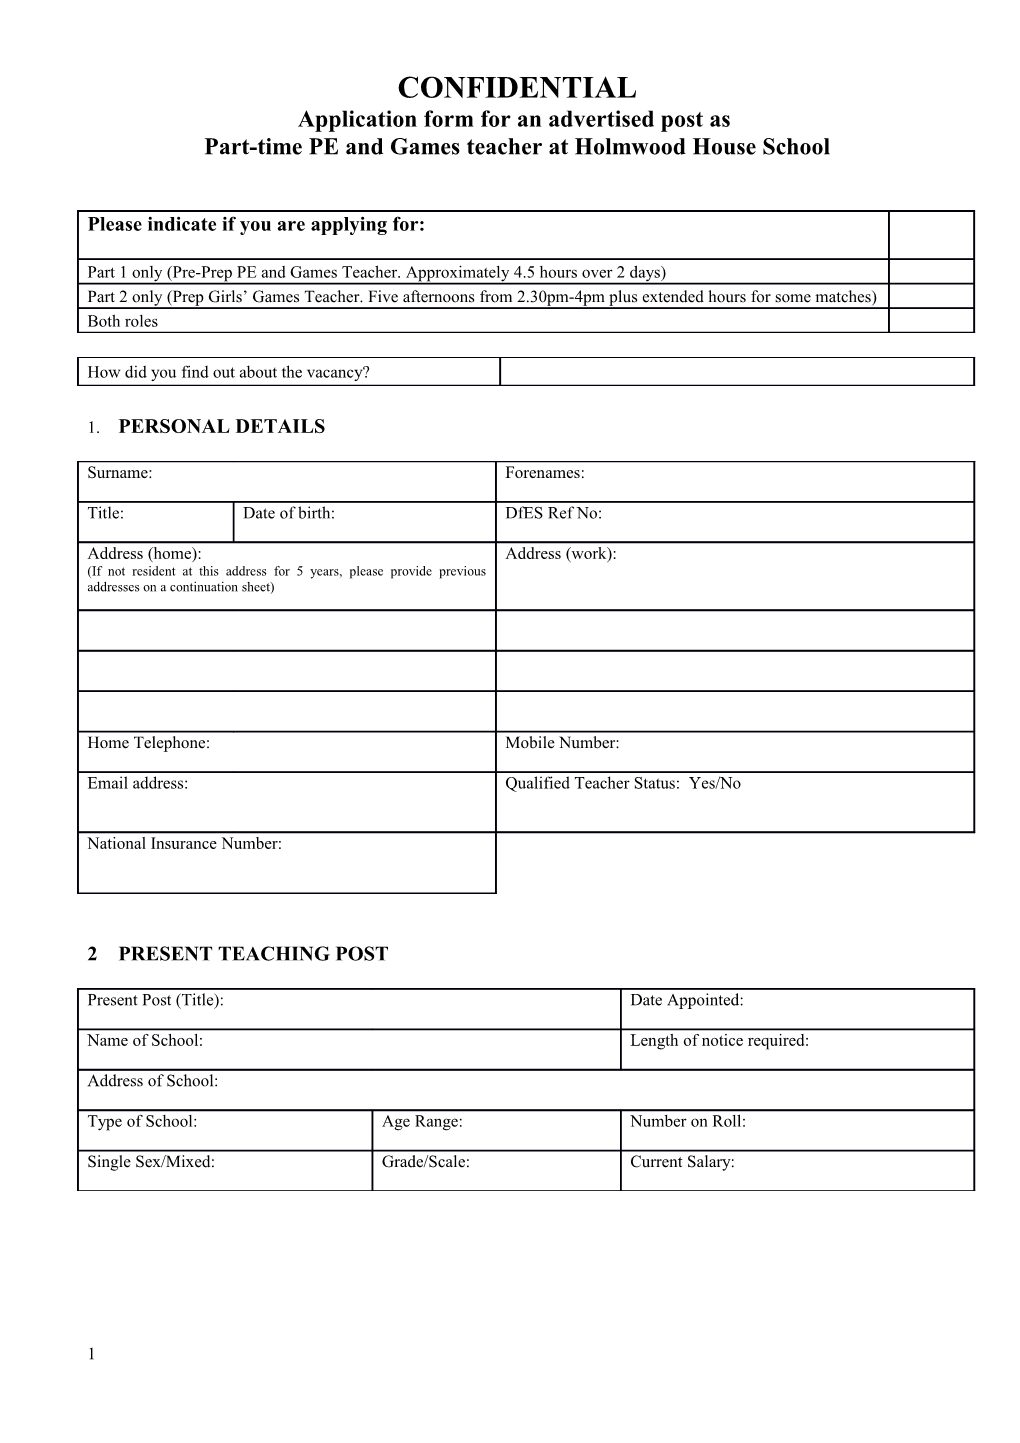 Application Form for an Advertised Post As